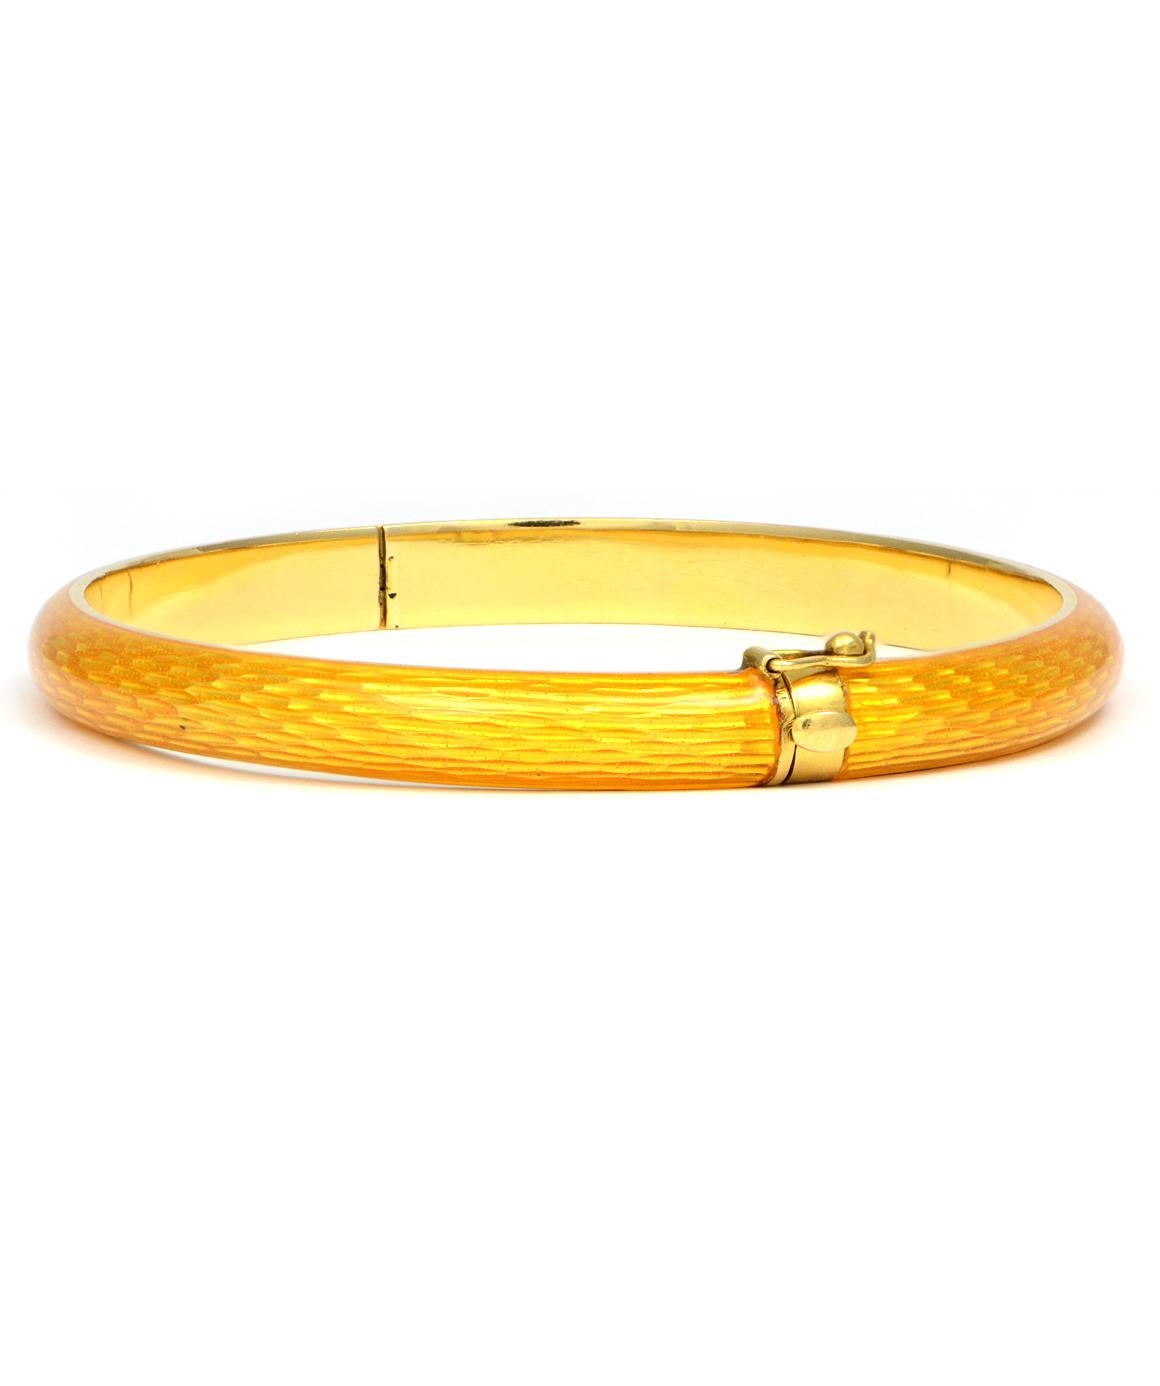 Excellent condition. This solid 18k yellow gold bangle bracelet features yellow enamel. The enamel is in excellent condition, I do not see any chips. The bangle has a bamboo style to it. The inside dimensions measure approximately 2.20 inches wide X